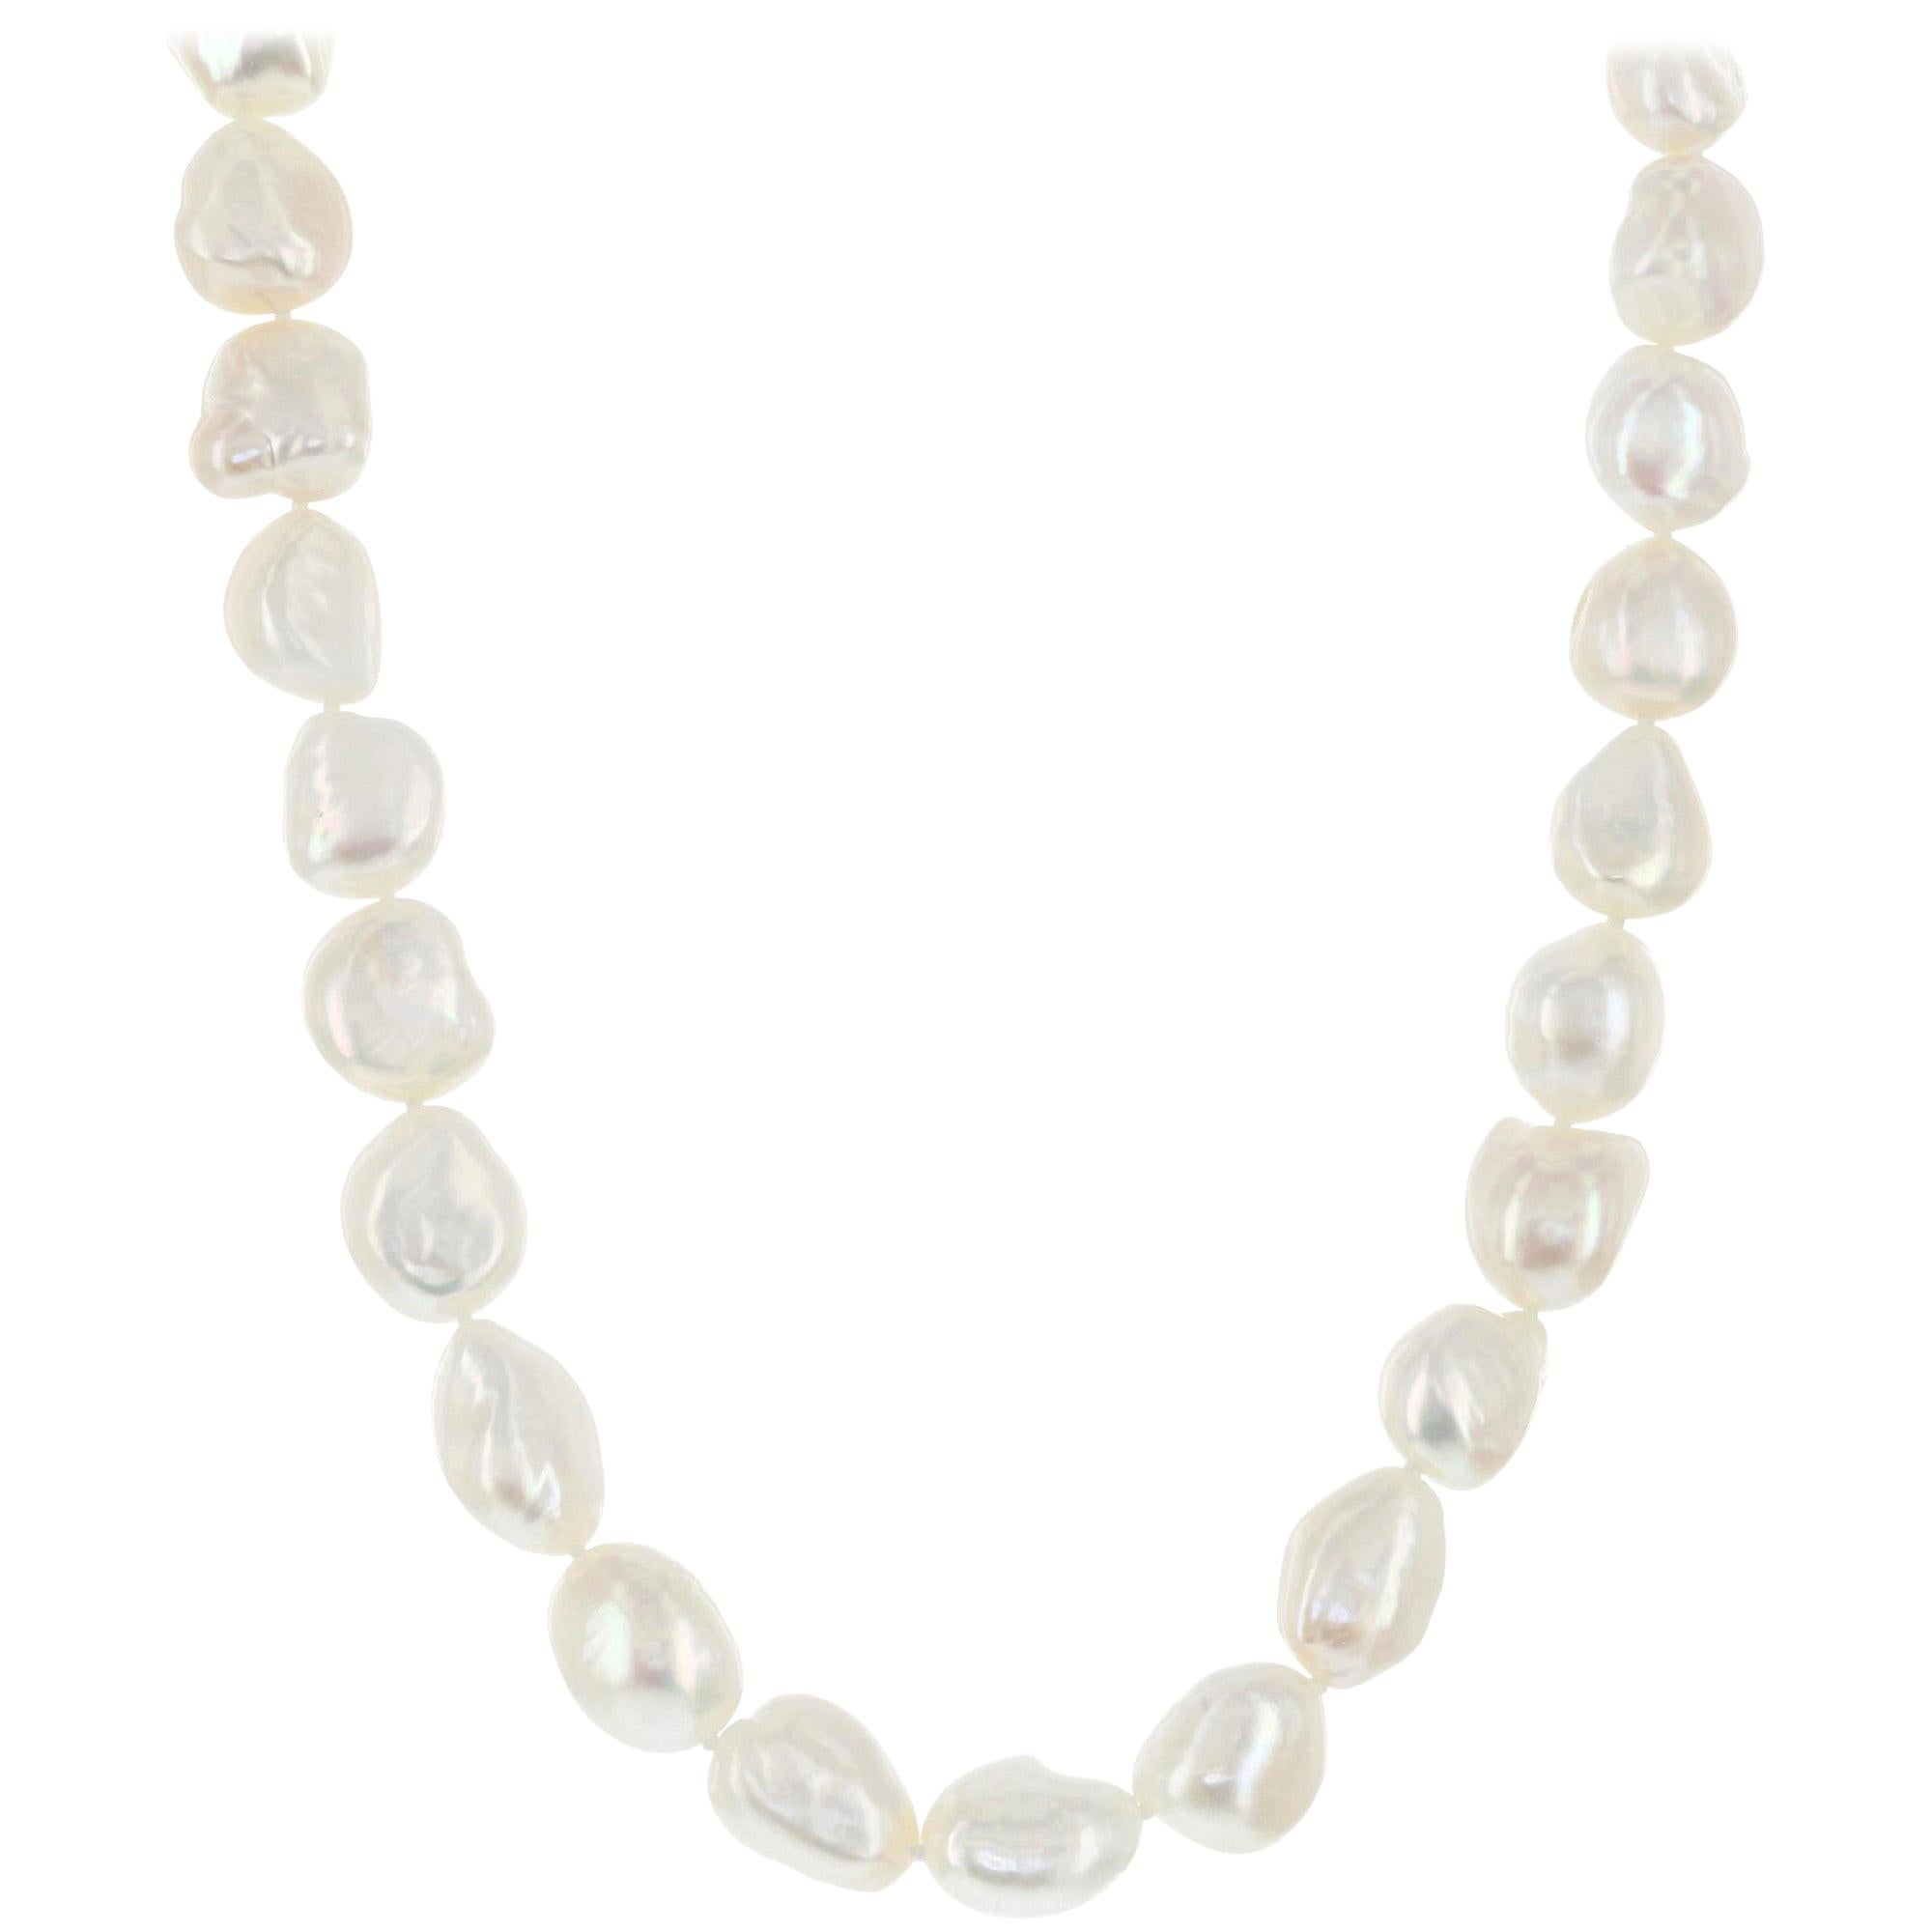 Freshwater White Pearl Baroque Choker Necklace with Silver Color Clasp